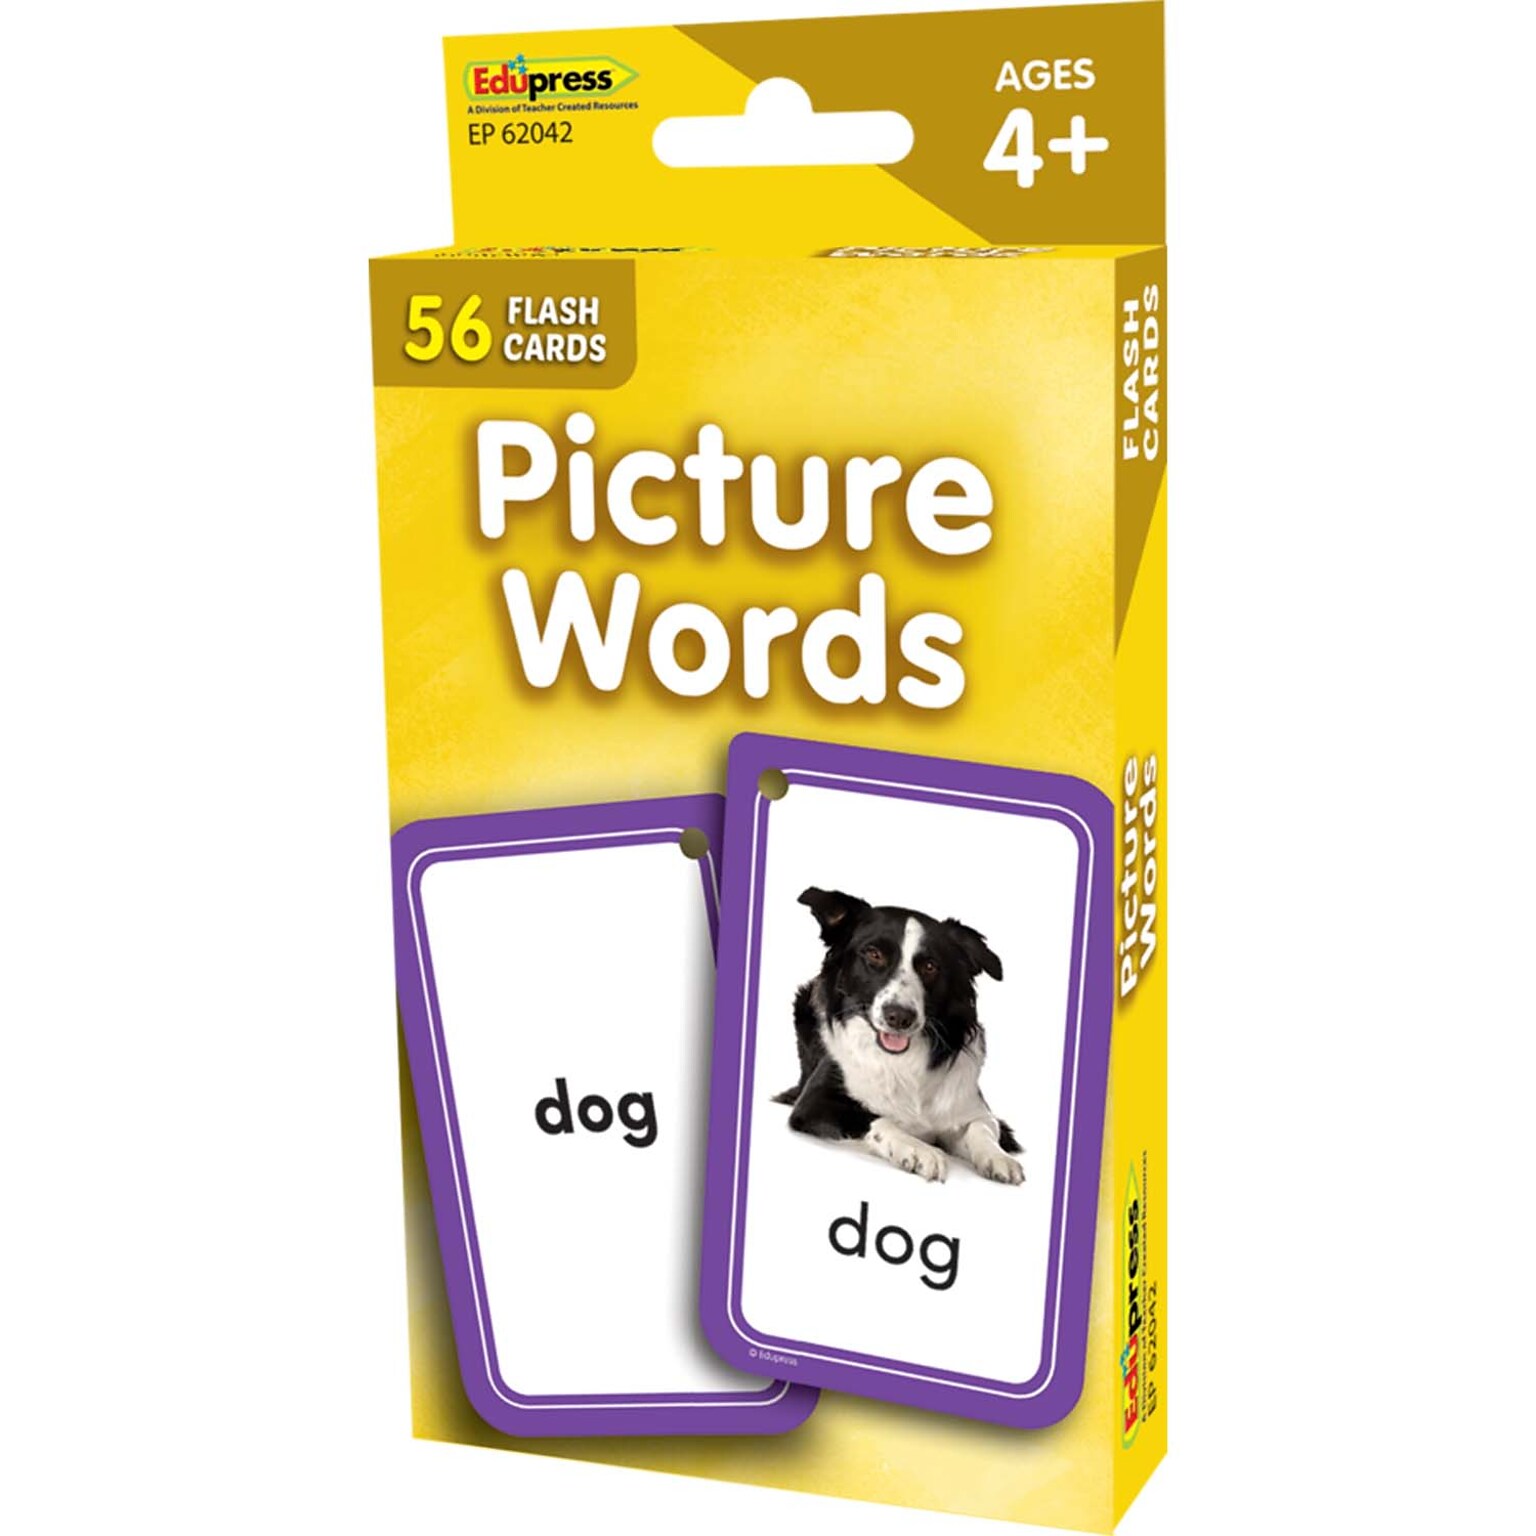 Edupress Picture Words Flash Cards, 56 Cards (TCR62042)